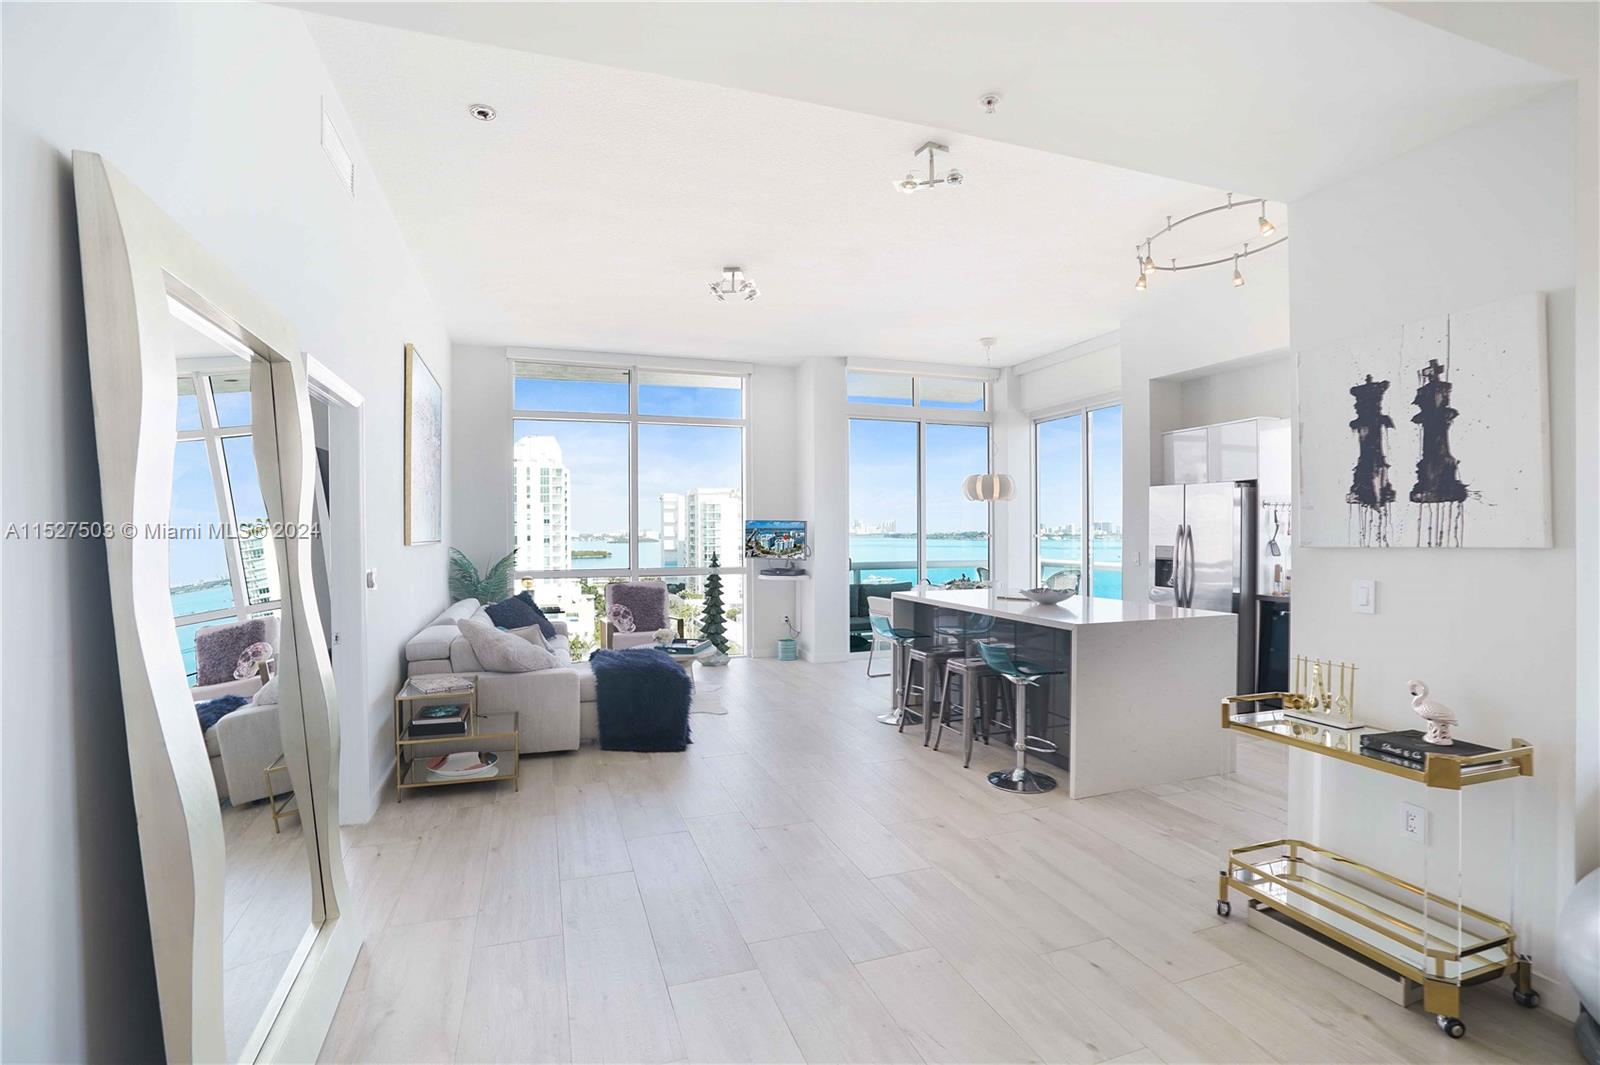 Stunning PH at 360 Condo in North Bay Village! Enjoy sweeping views of the bay and ocean from this 1,552SF unit with 11' ceilings and high impact floor to ceiling windows. This spacious condo was originally designed as a 3 bedroom floor plan but it currently has 2 enclosed bedrooms and the 3rd one is open allowing for an office, formal dining or open den space. It can easily be converted into a 3 bedroom condo. It boasts a designer kitchen and bathrooms with wood-look porcelain tile throughout, designer lighting, a Nest climate system and motorized blinds. The master bathroom offers a marble stand in shower and a Roman jacuzzi tub. 360 Condo offers a gated community with private security, a private marina, 2 heated pools, fitness center, valet, 24hr concierge, EV charging stations + more!